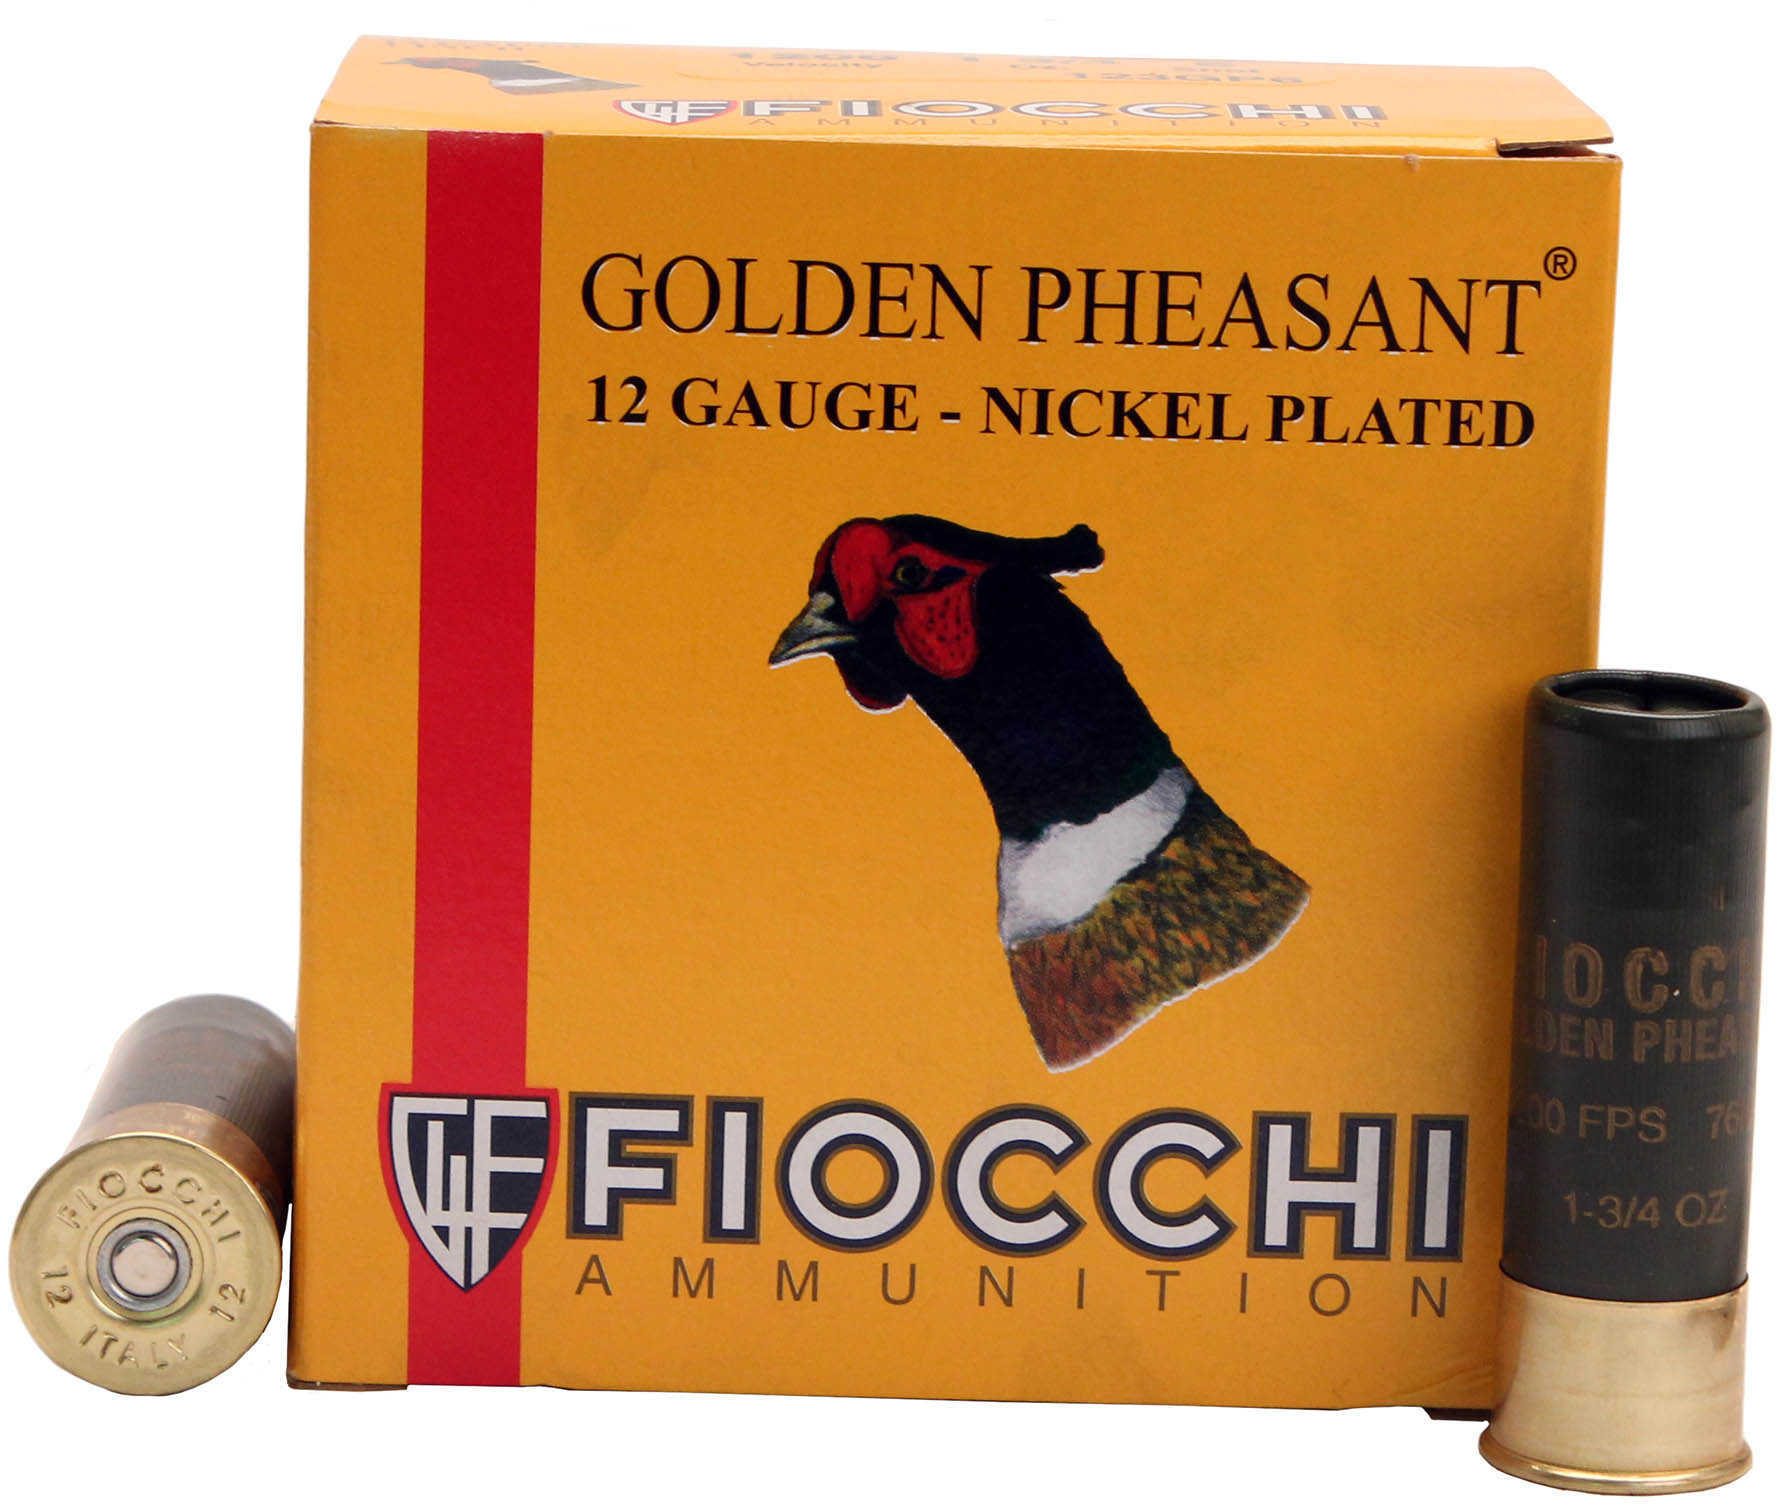 12 Gauge 25 Rounds Ammunition Fiocchi Ammo 3" 1 3/4 oz Nickel-Plated Lead #6